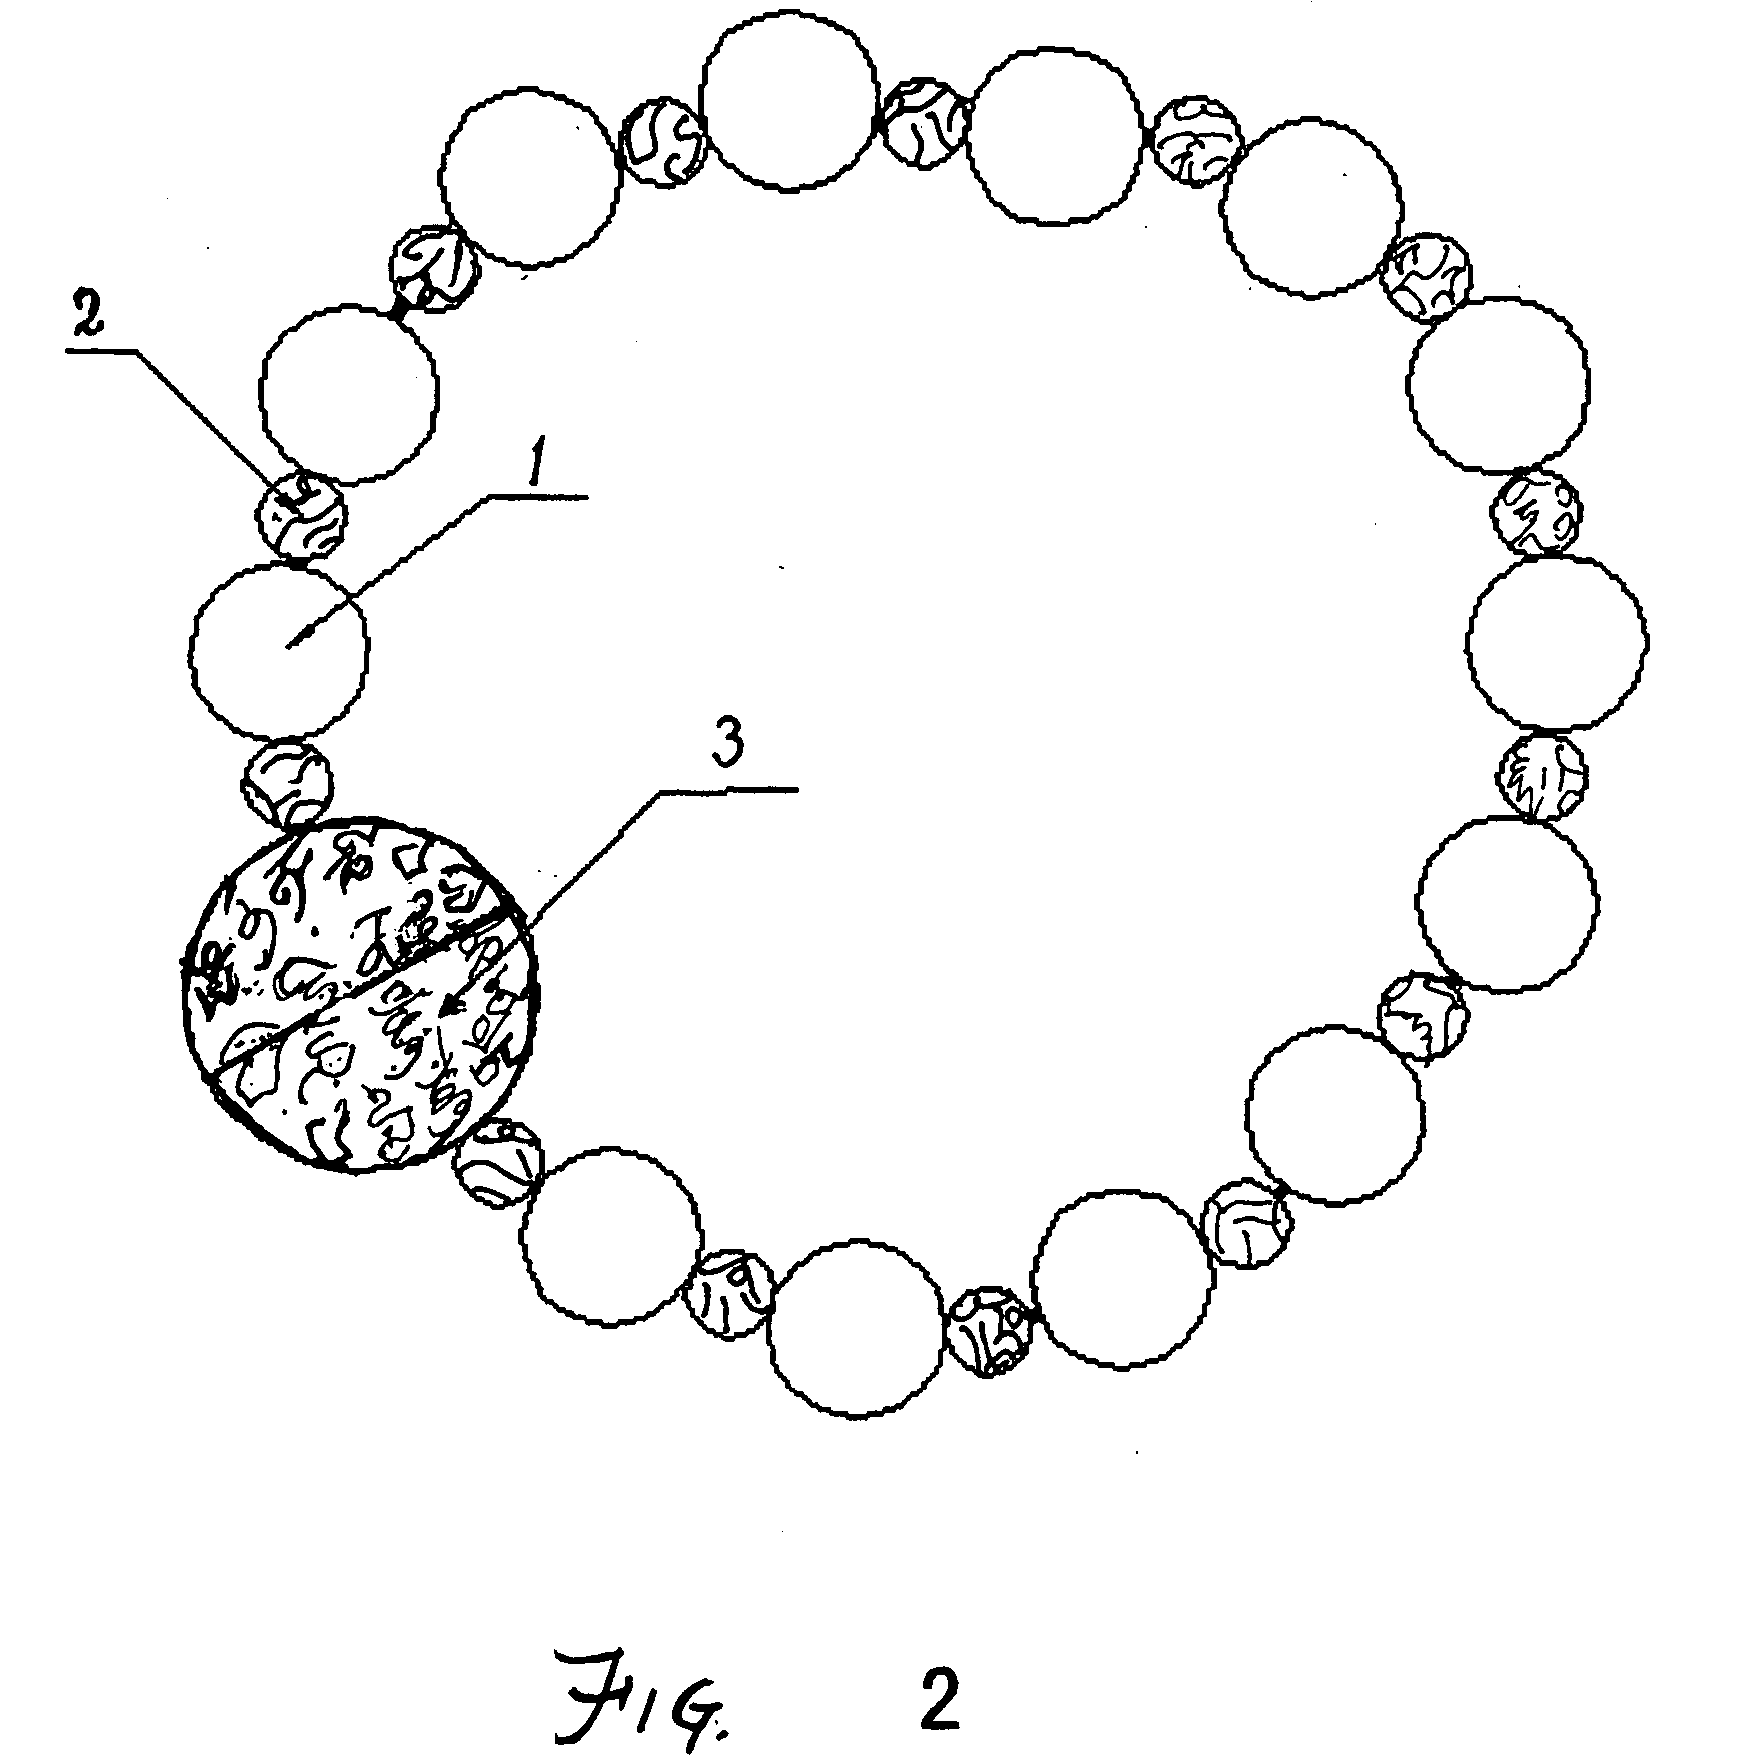 Bead chain with modified structure